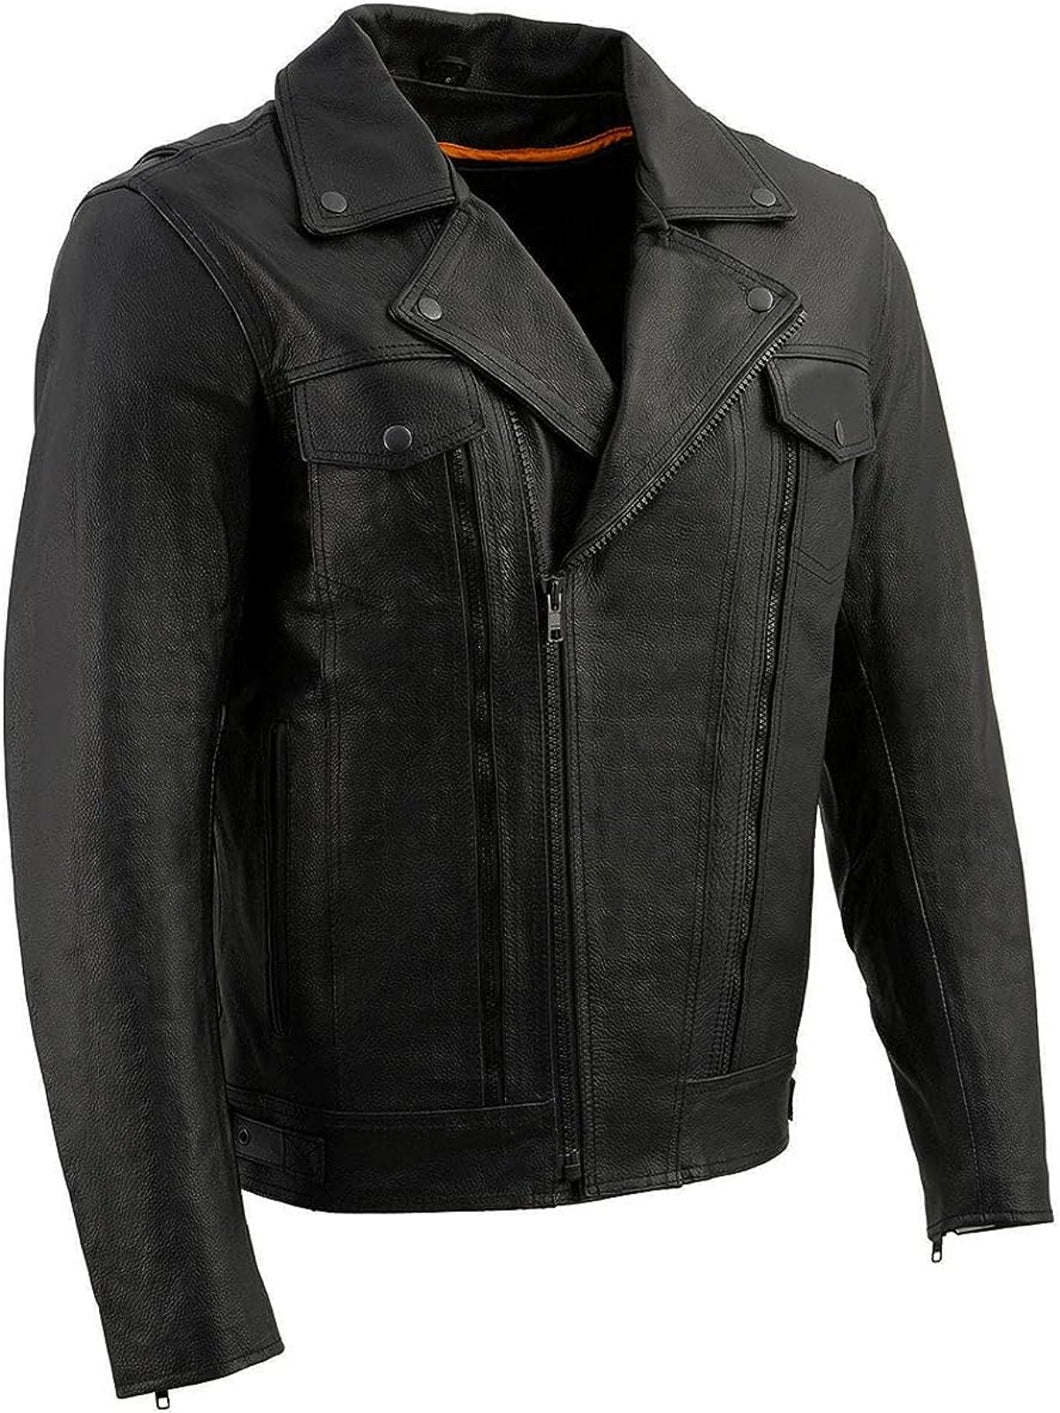 Men’s Black Leather Motorcycle Jacket with Utility Pockets